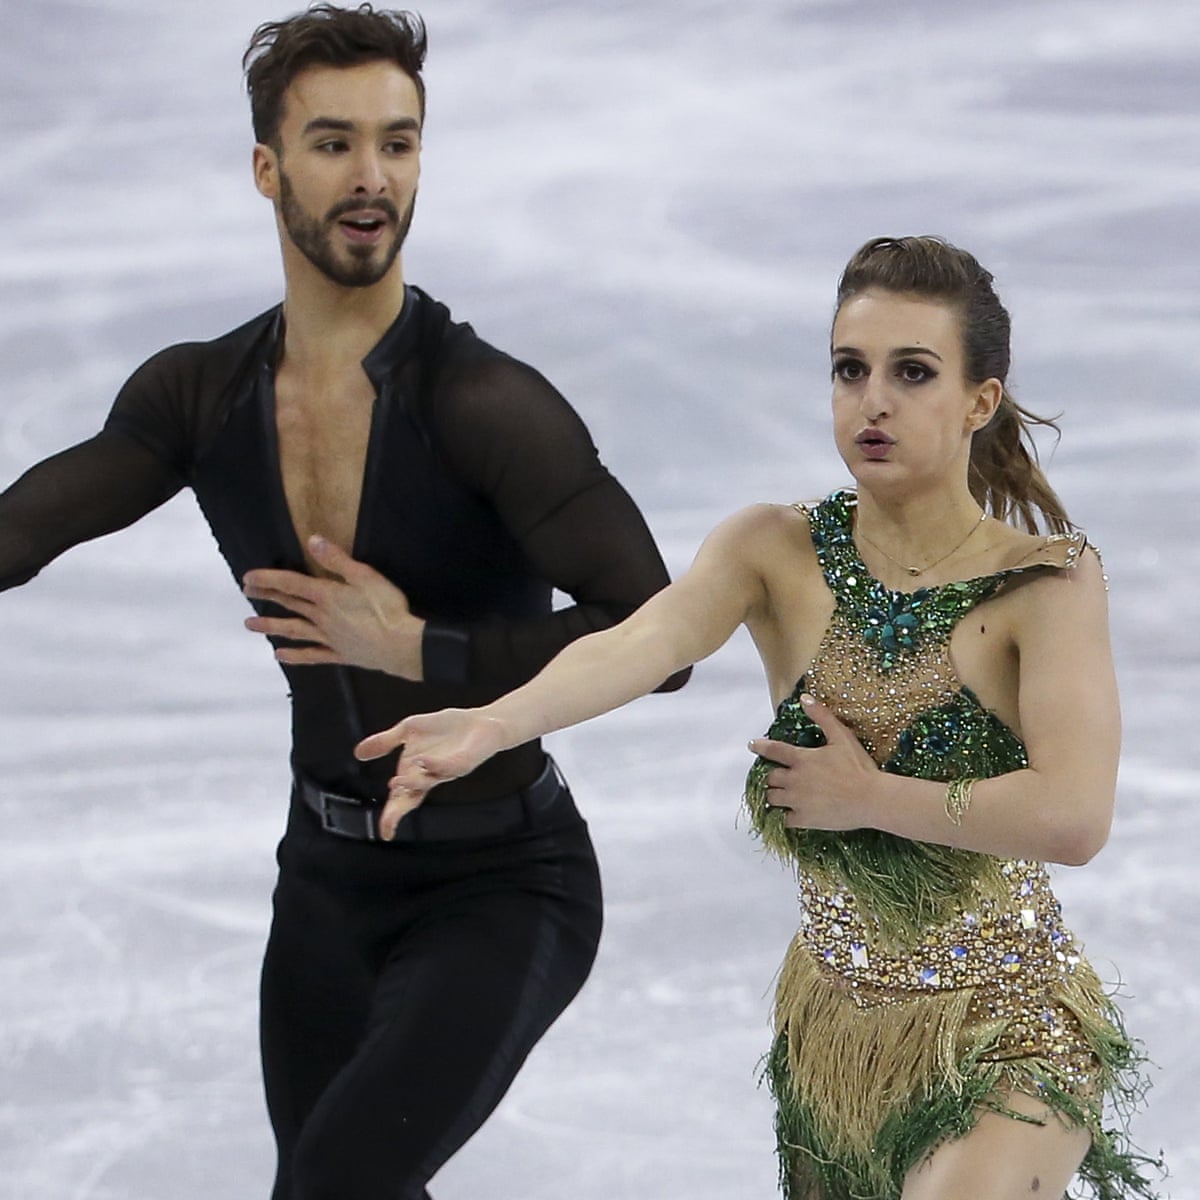 French Skaters Breast Pops Out During Mid-Routine Olympic Wardrobe Malfunct...